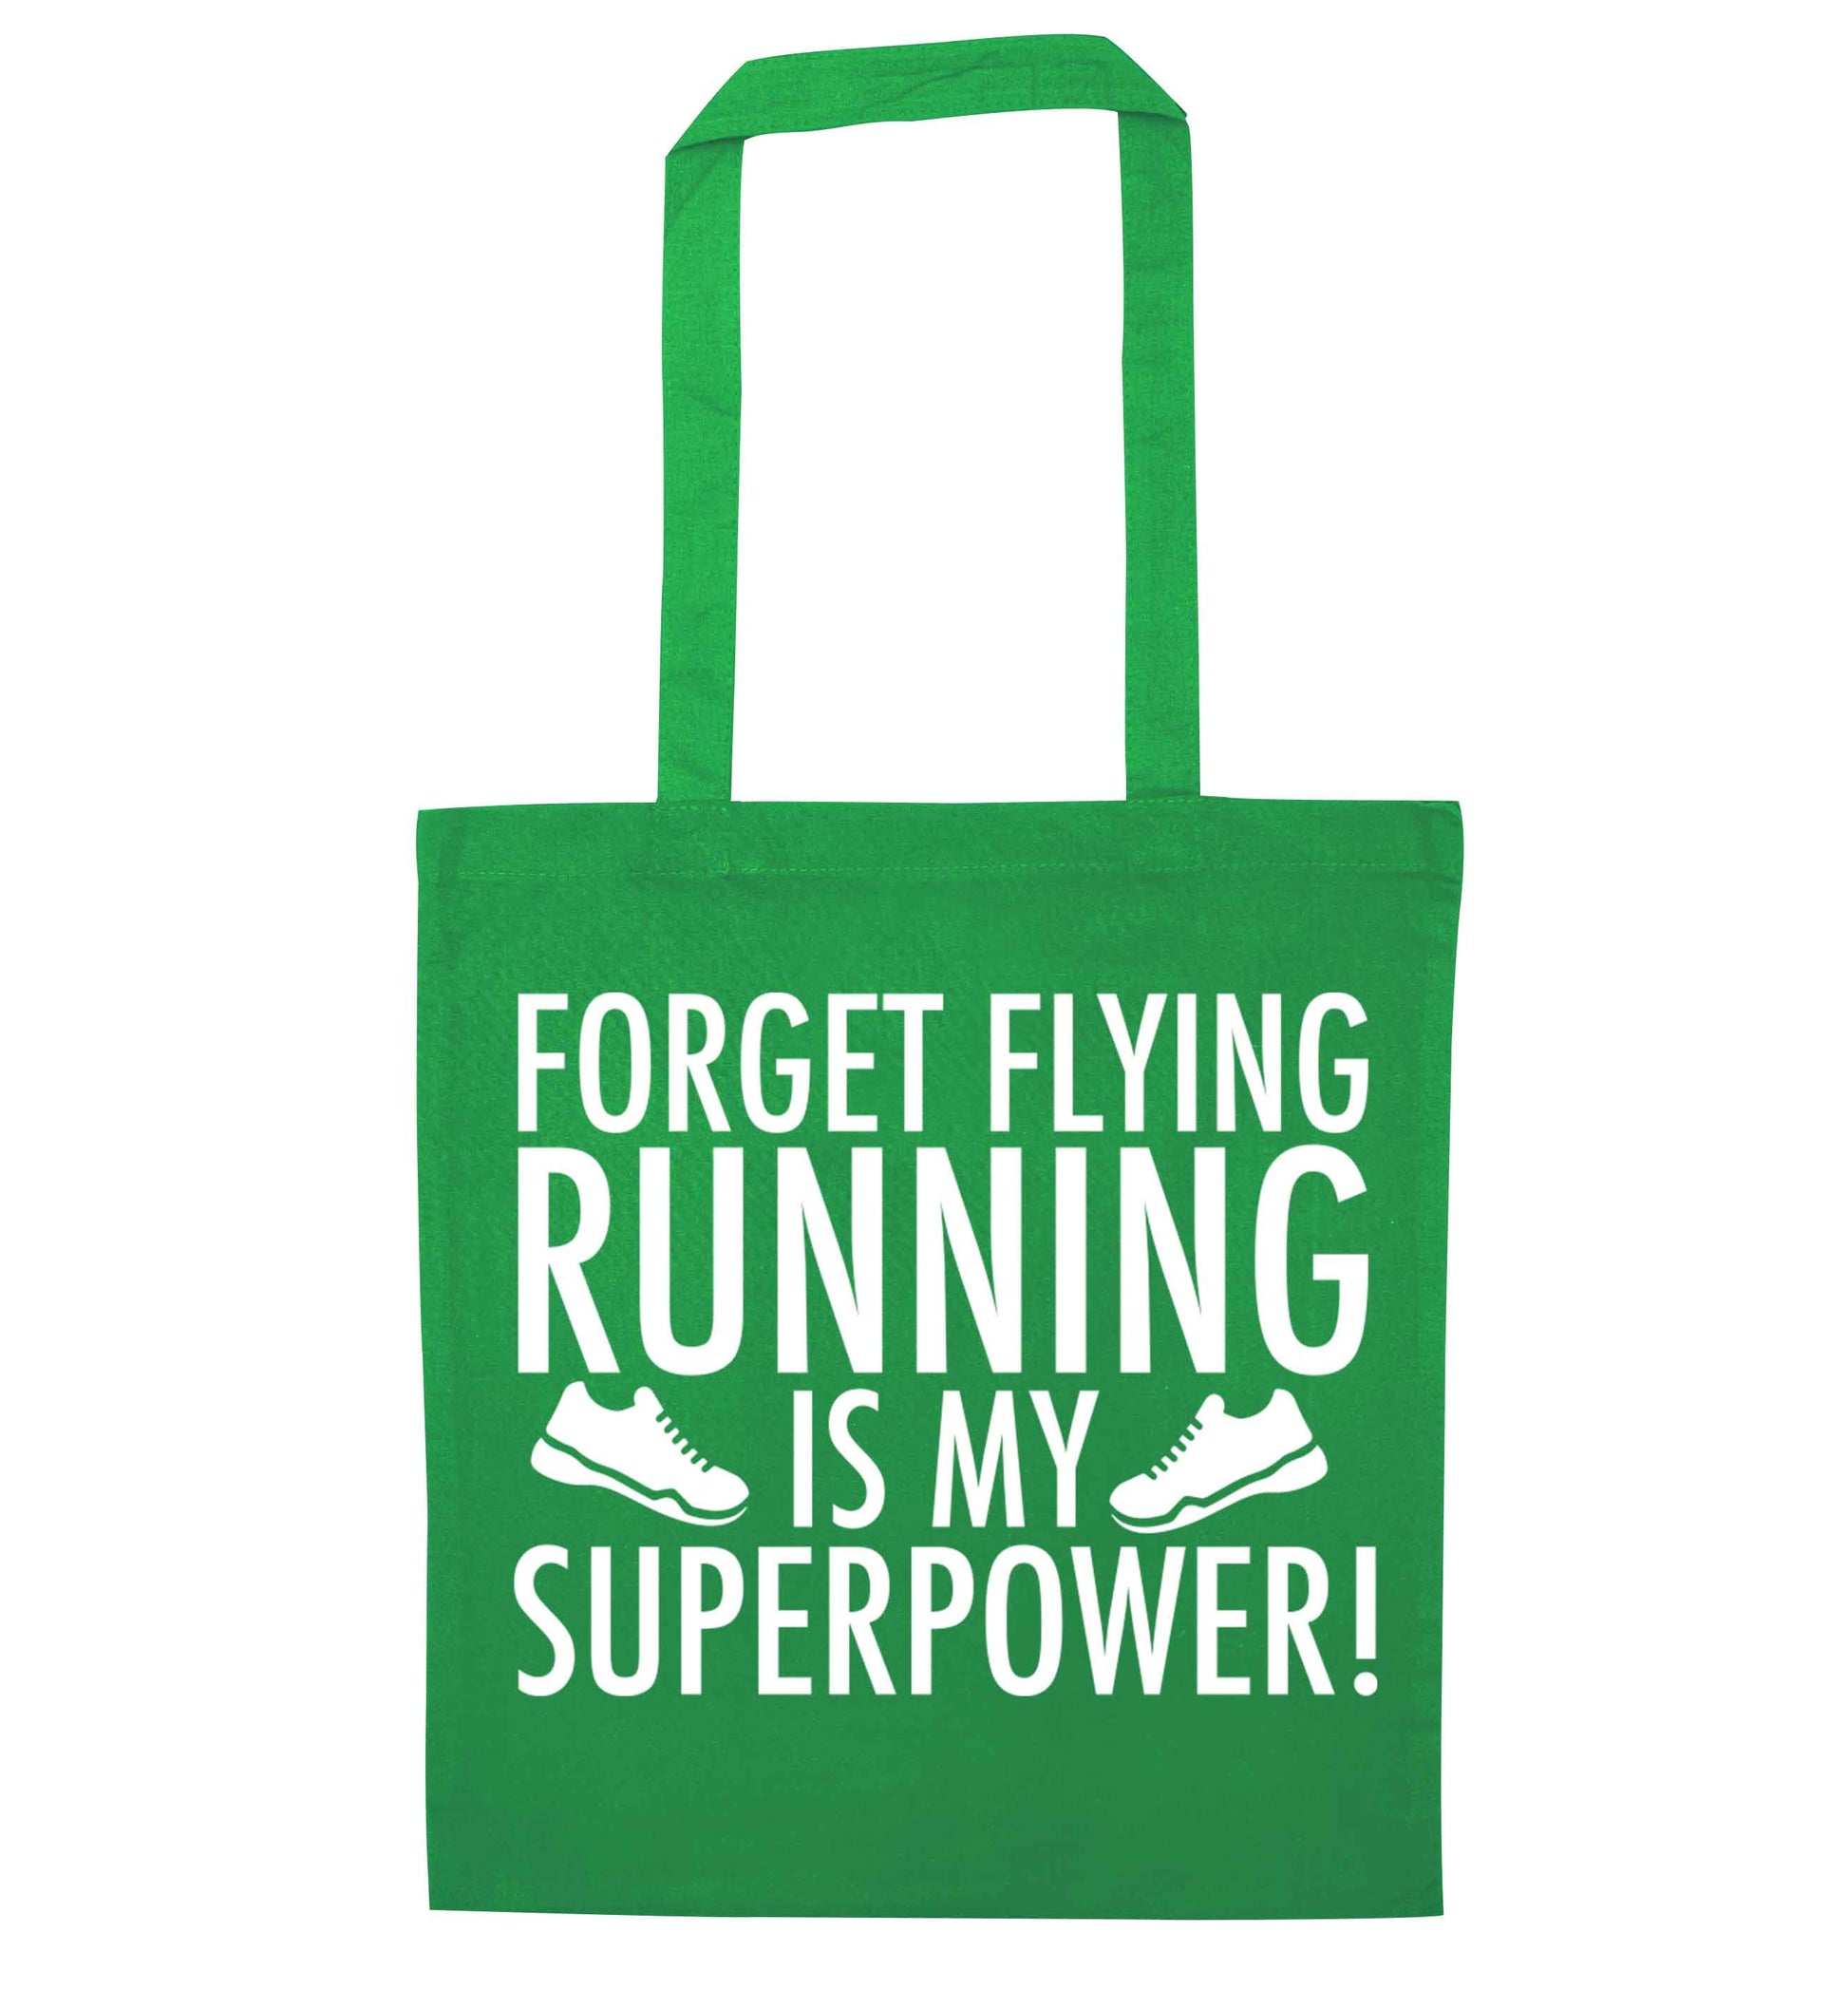 Crazy running dude green tote bag